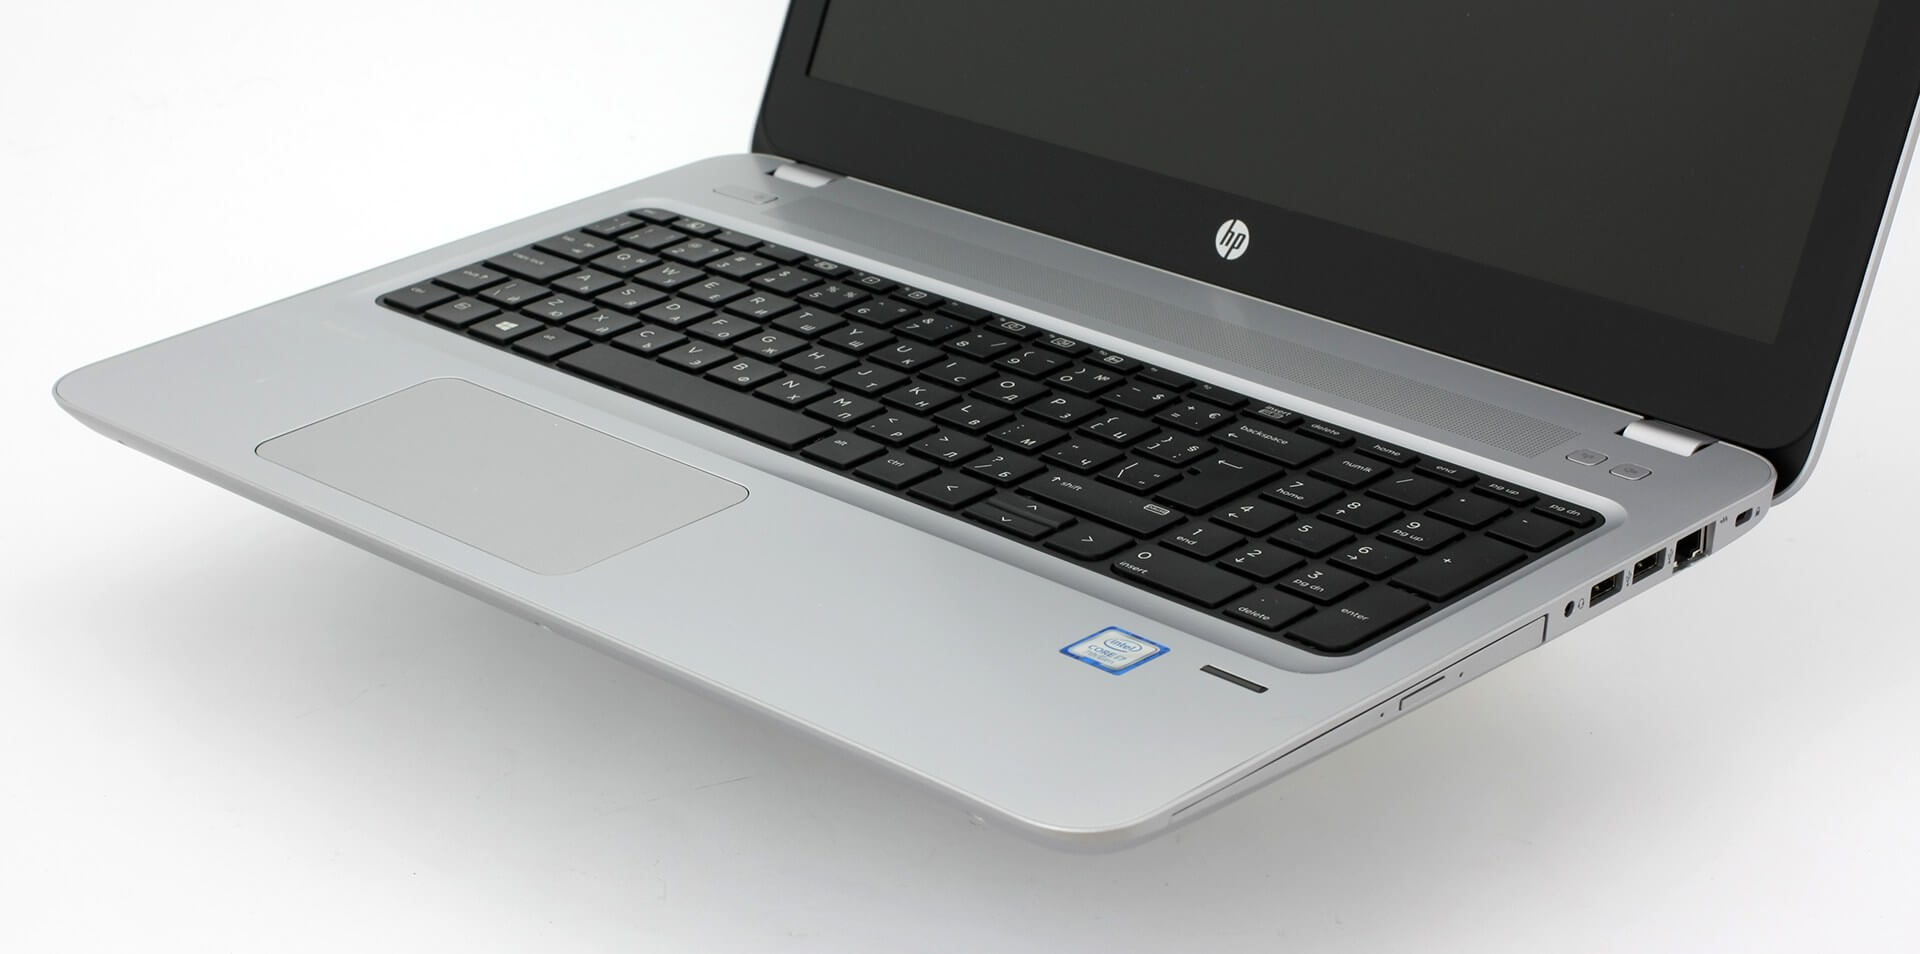 HP issues recall for 50,000 laptop batteries